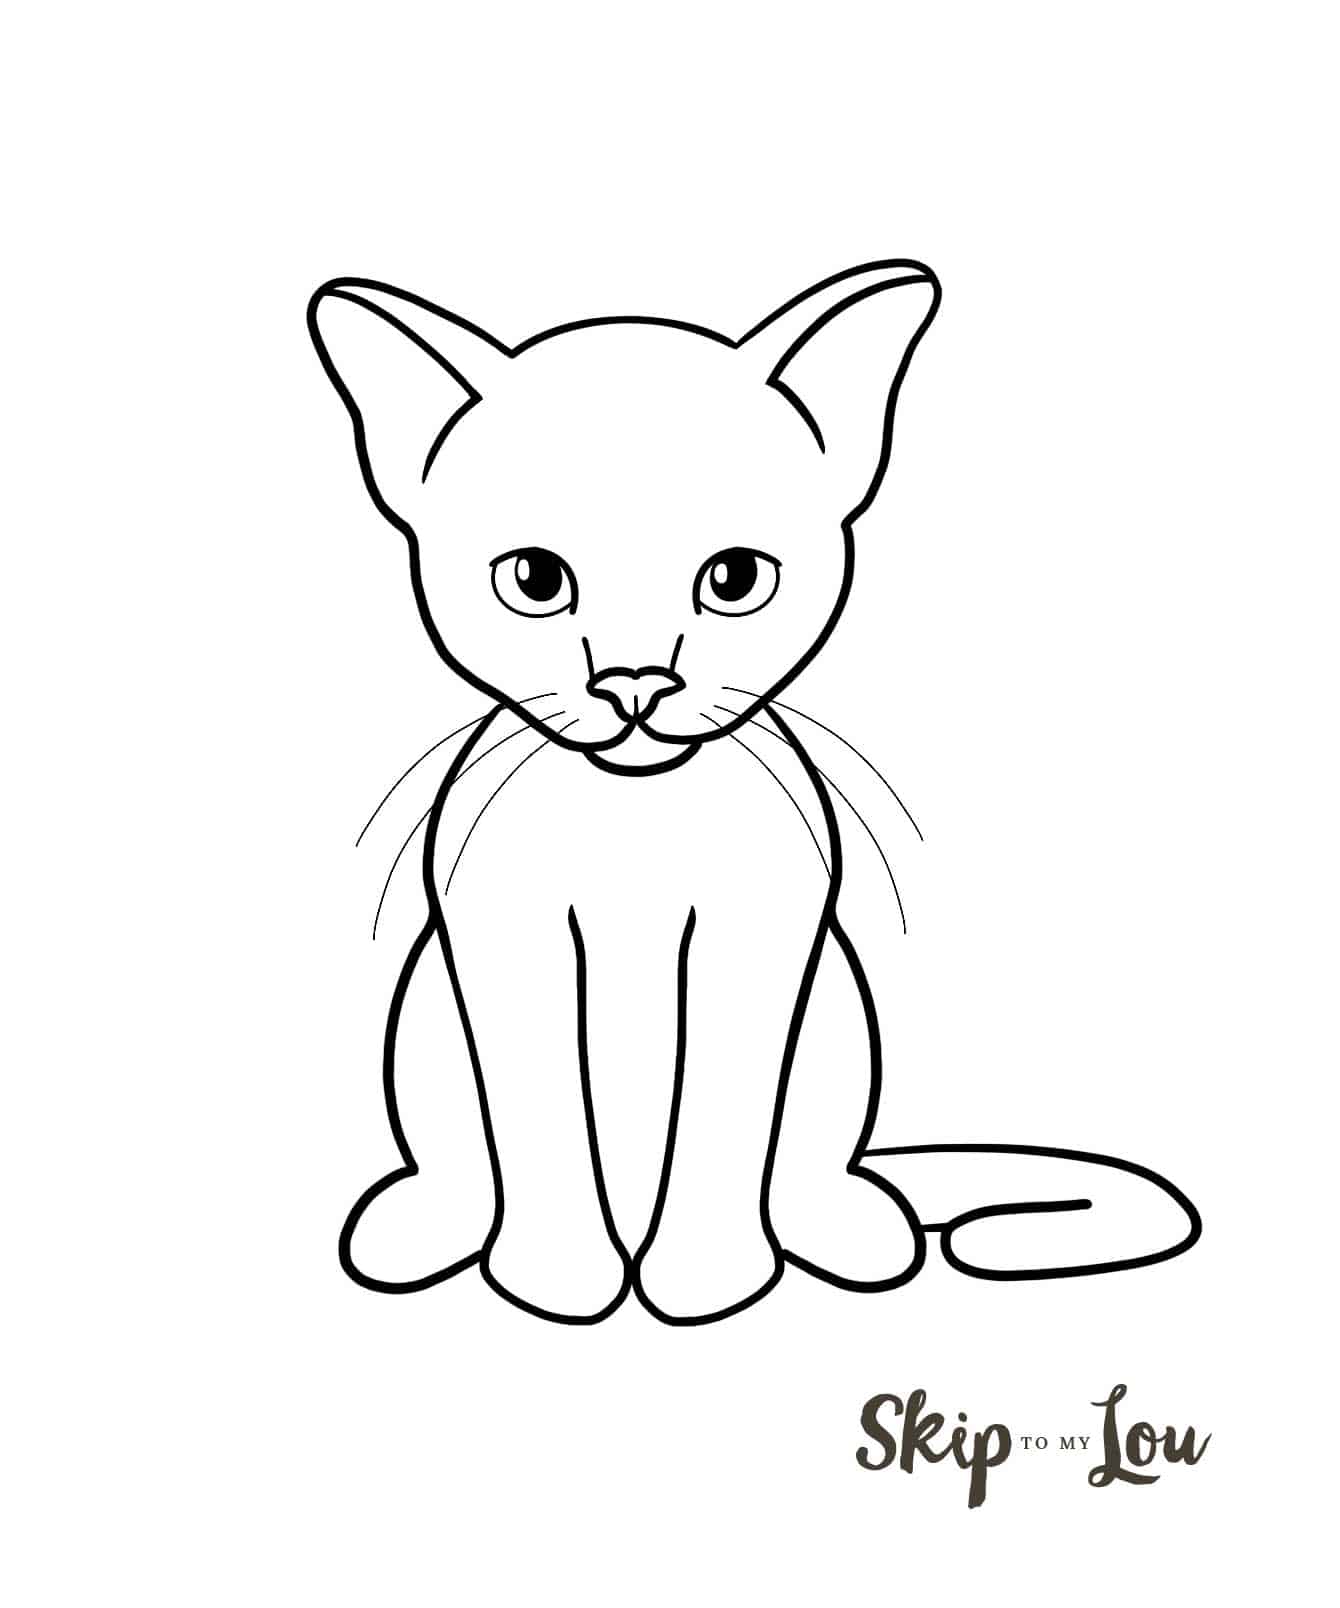 How to Draw a Cat Easy Drawing Tutorial Skip To My Lou